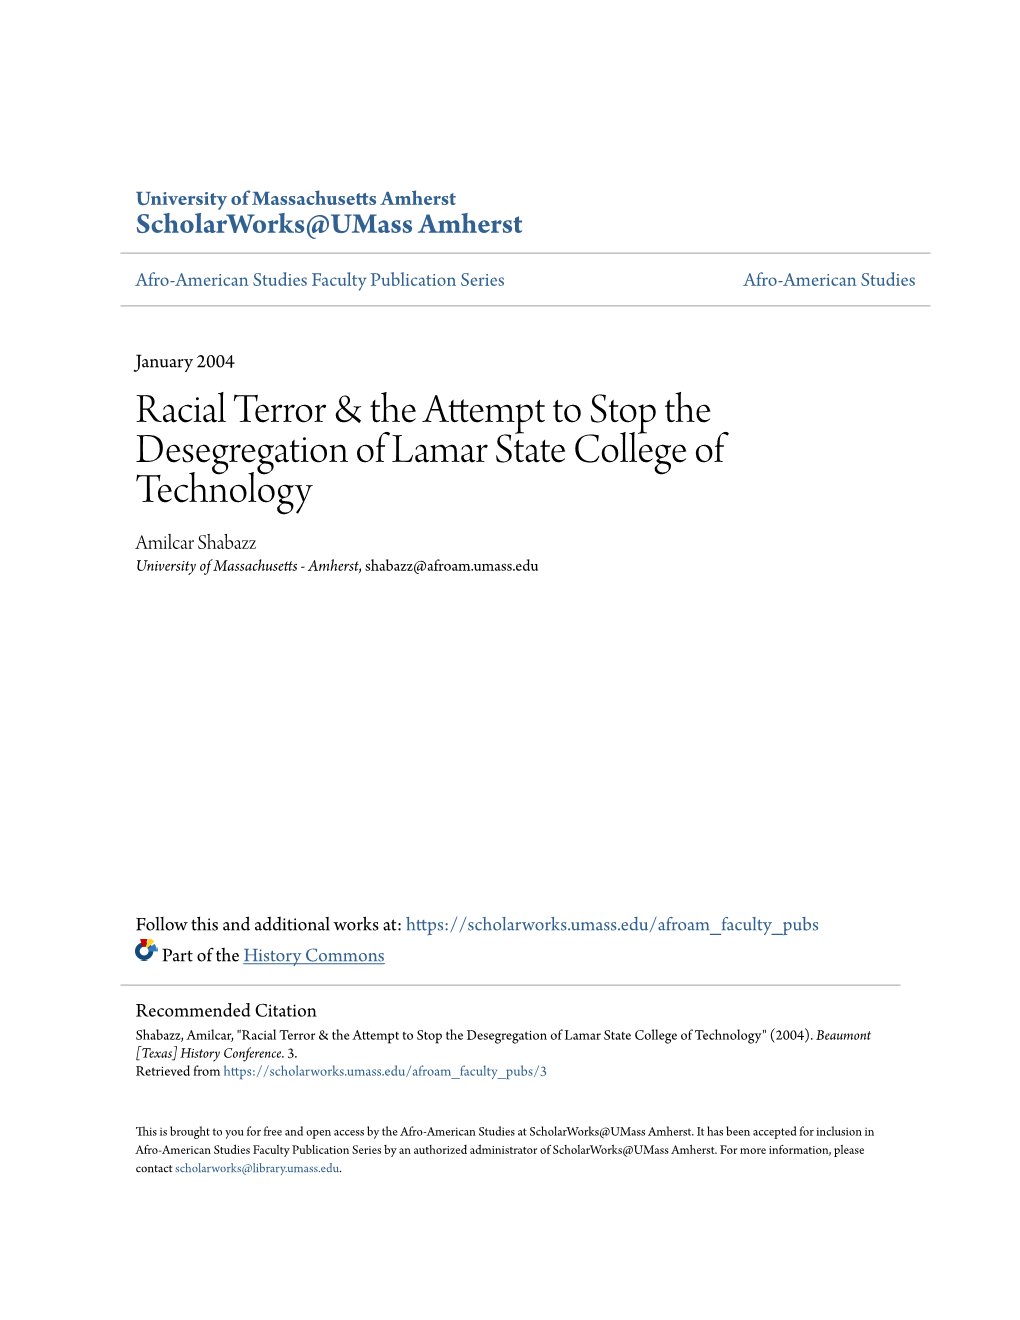 Racial Terror & the Attempt to Stop the Desegregation of Lamar State College of Technology